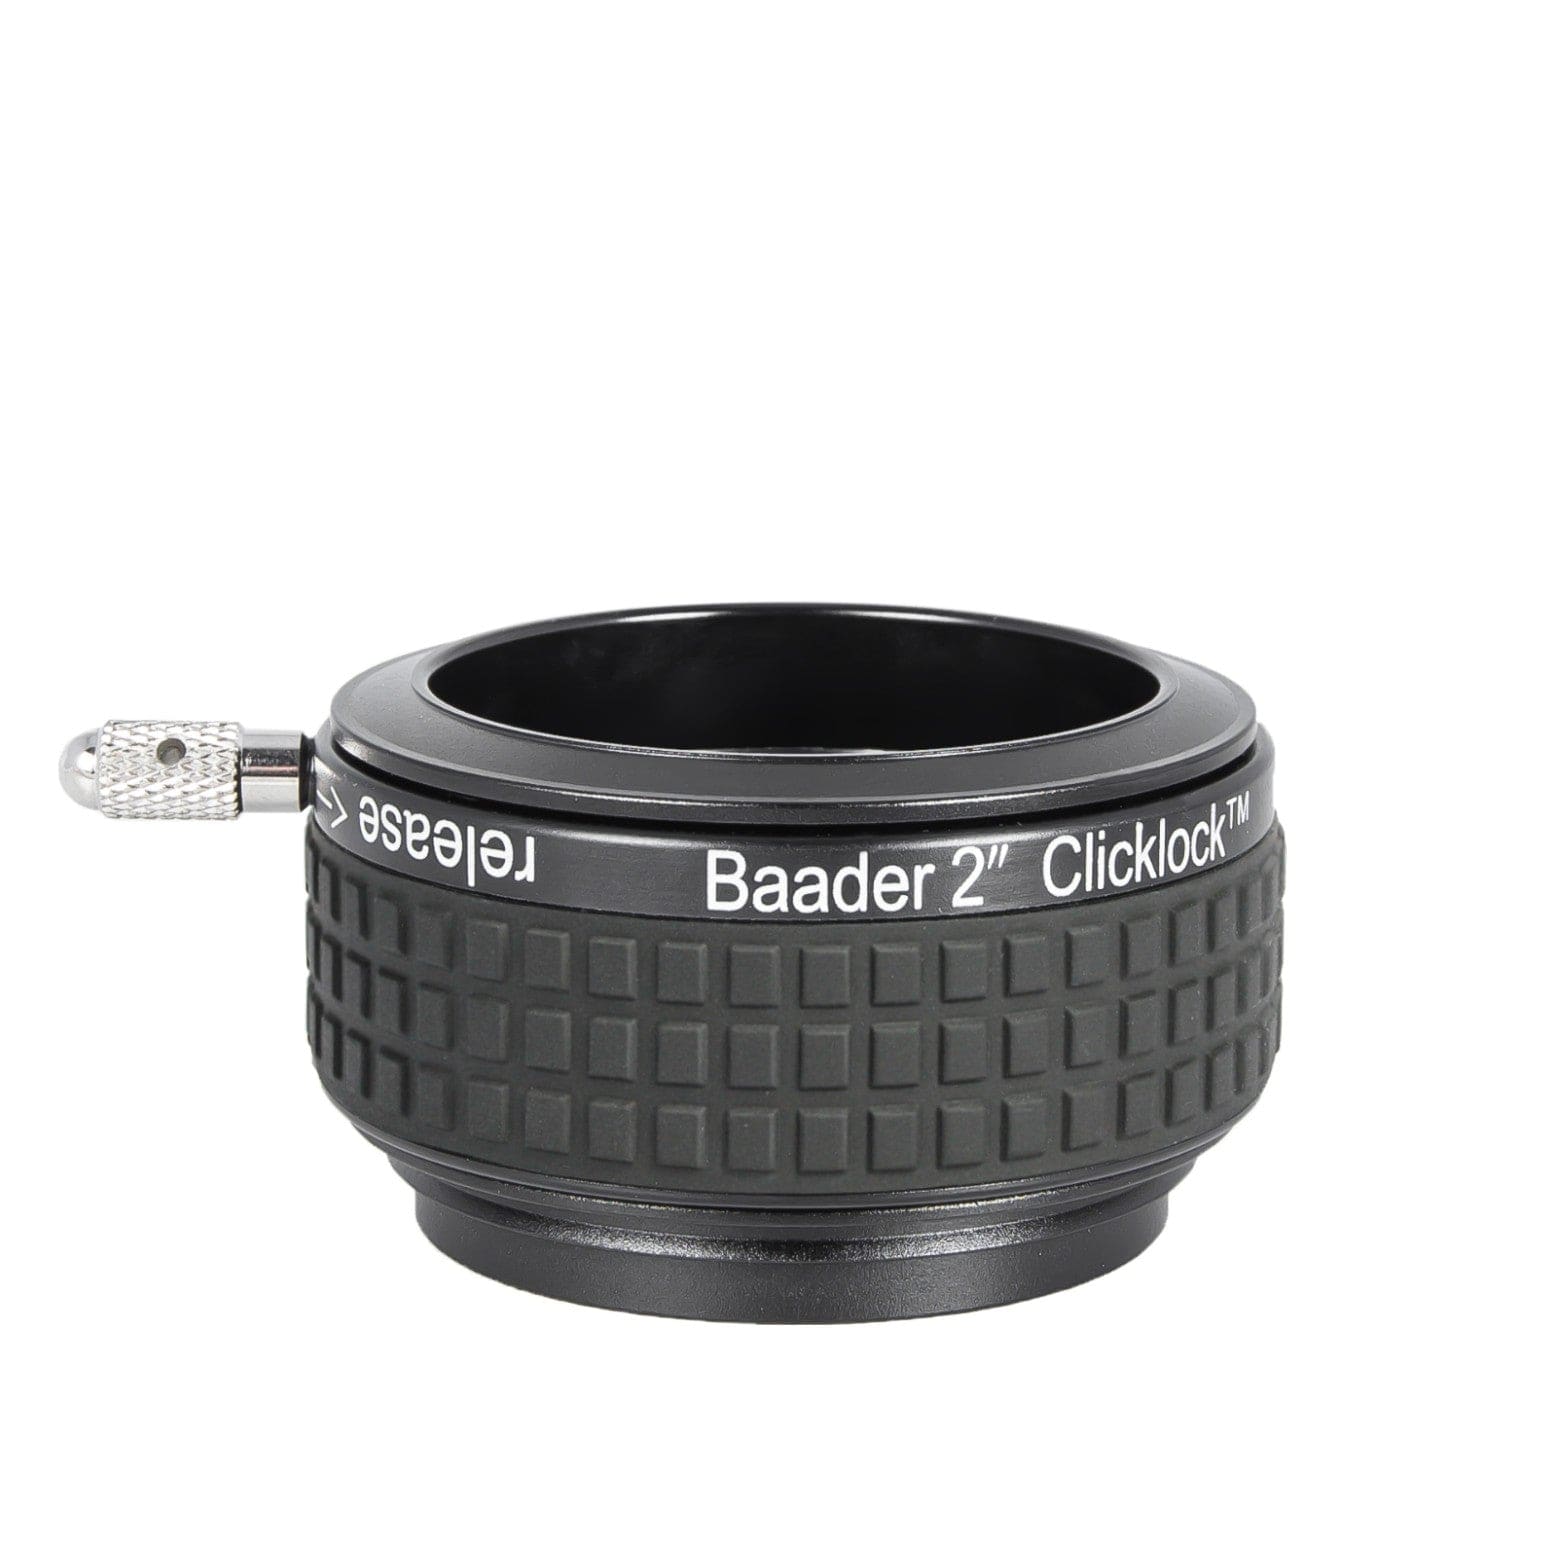 Baader Planetarium Accessory Baader 2" ClickLock S58 clamp with ring-dovetail (Baader Diamond Steeltrack) - 2956258